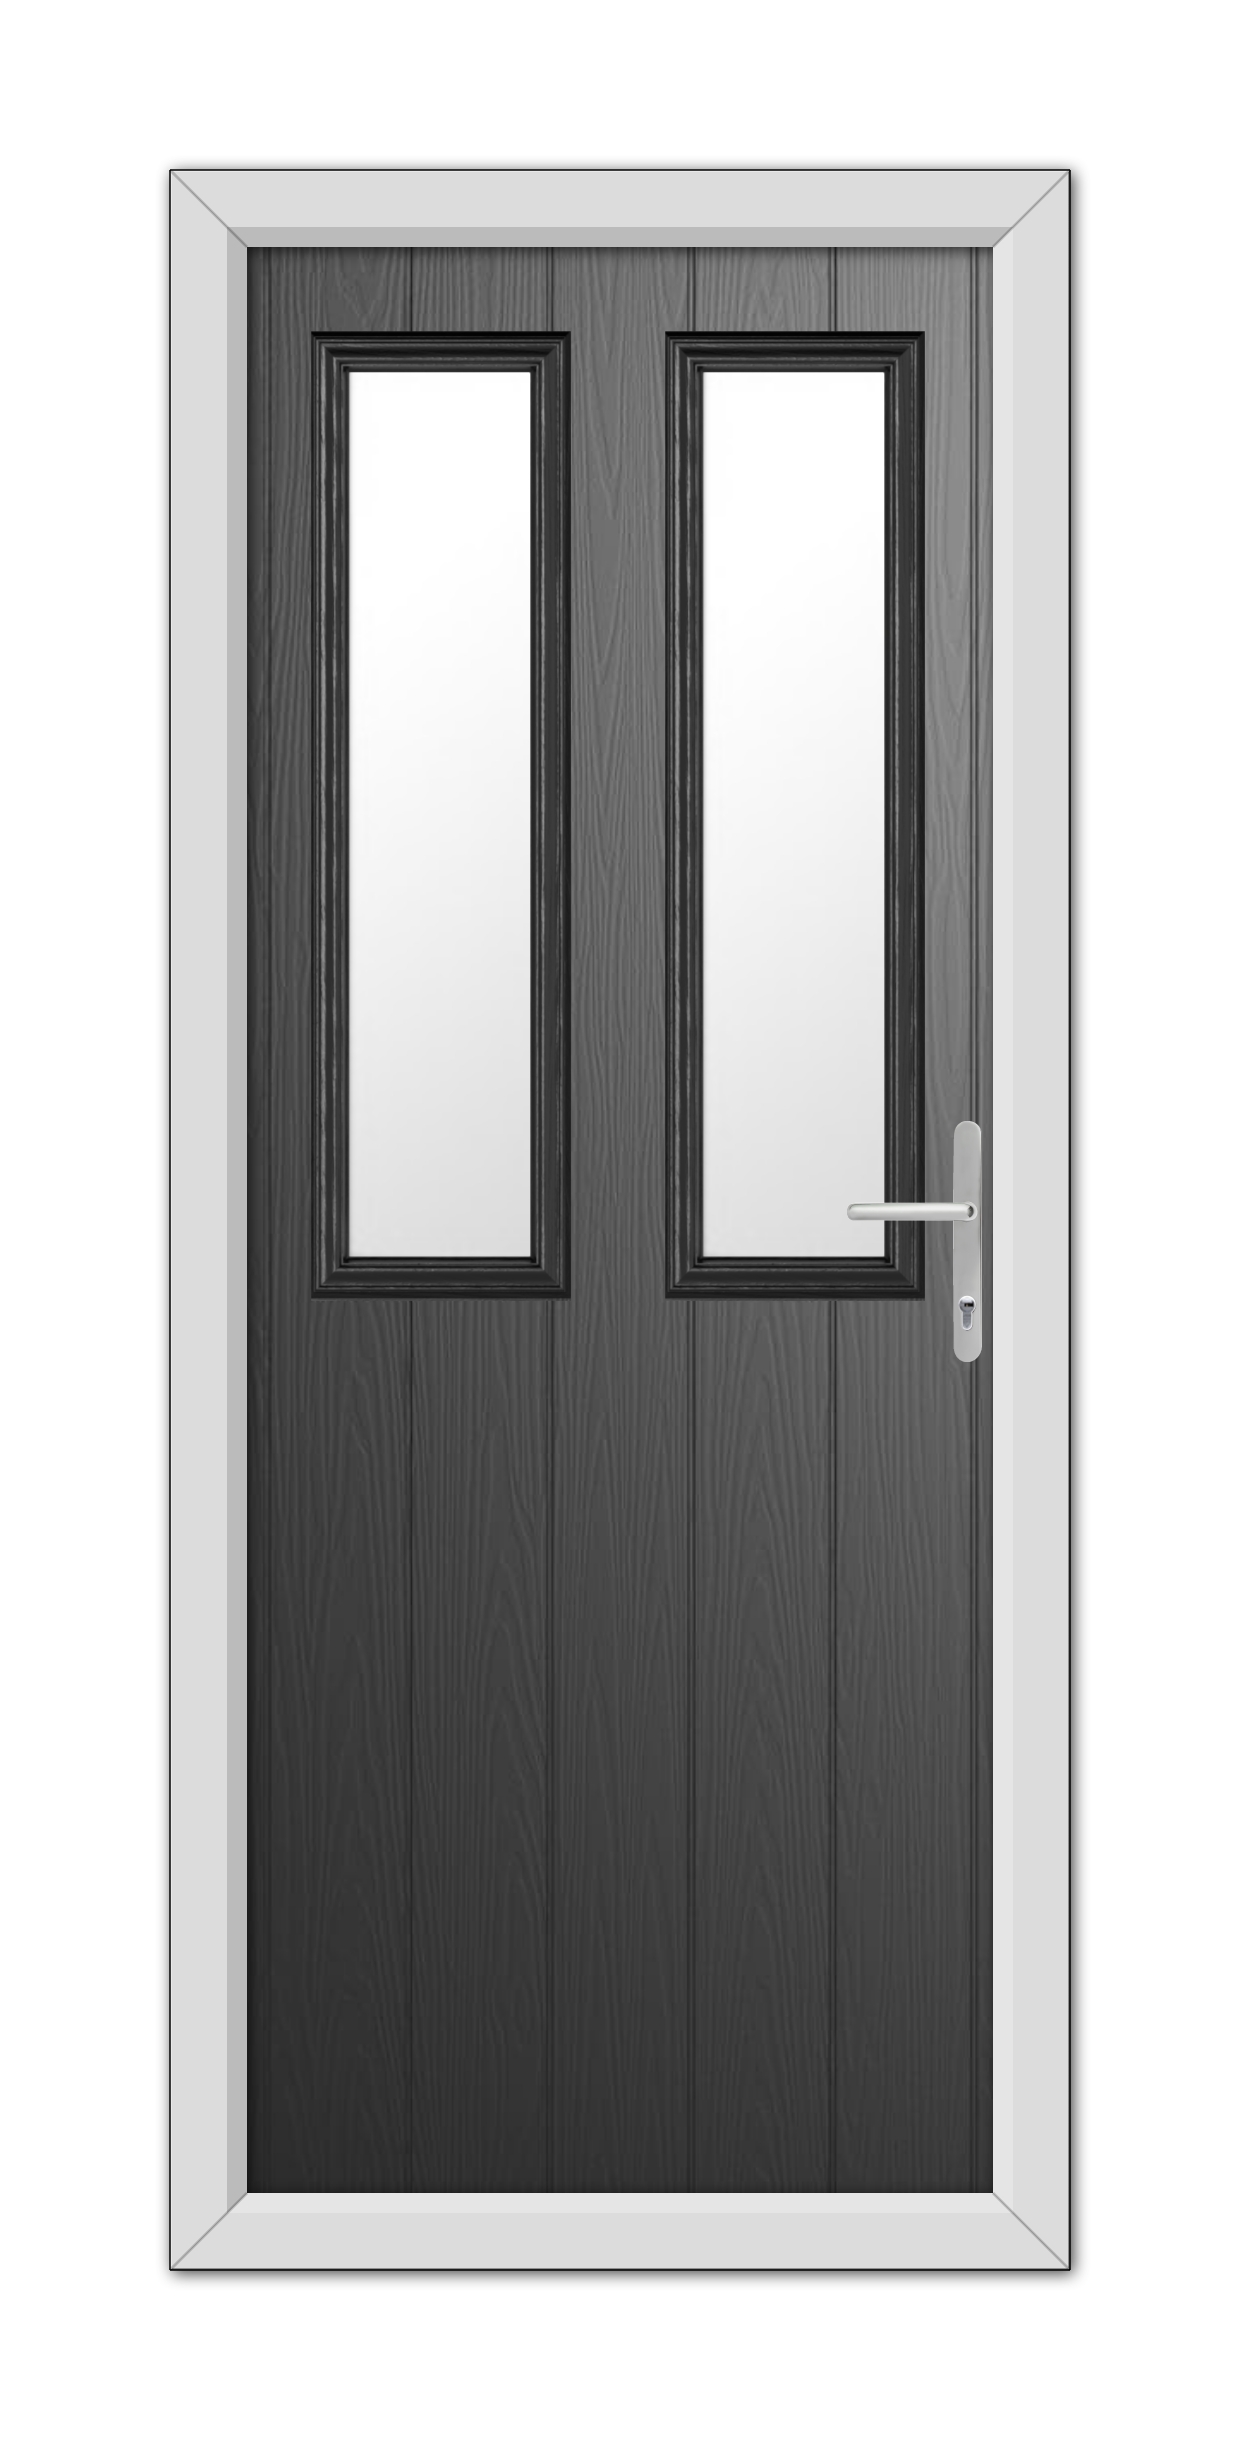 Double doors in a Black Wellington Composite Door 48mm Timber Core finish with vertical glass panels, silver handles, and a white frame, viewed from the front.